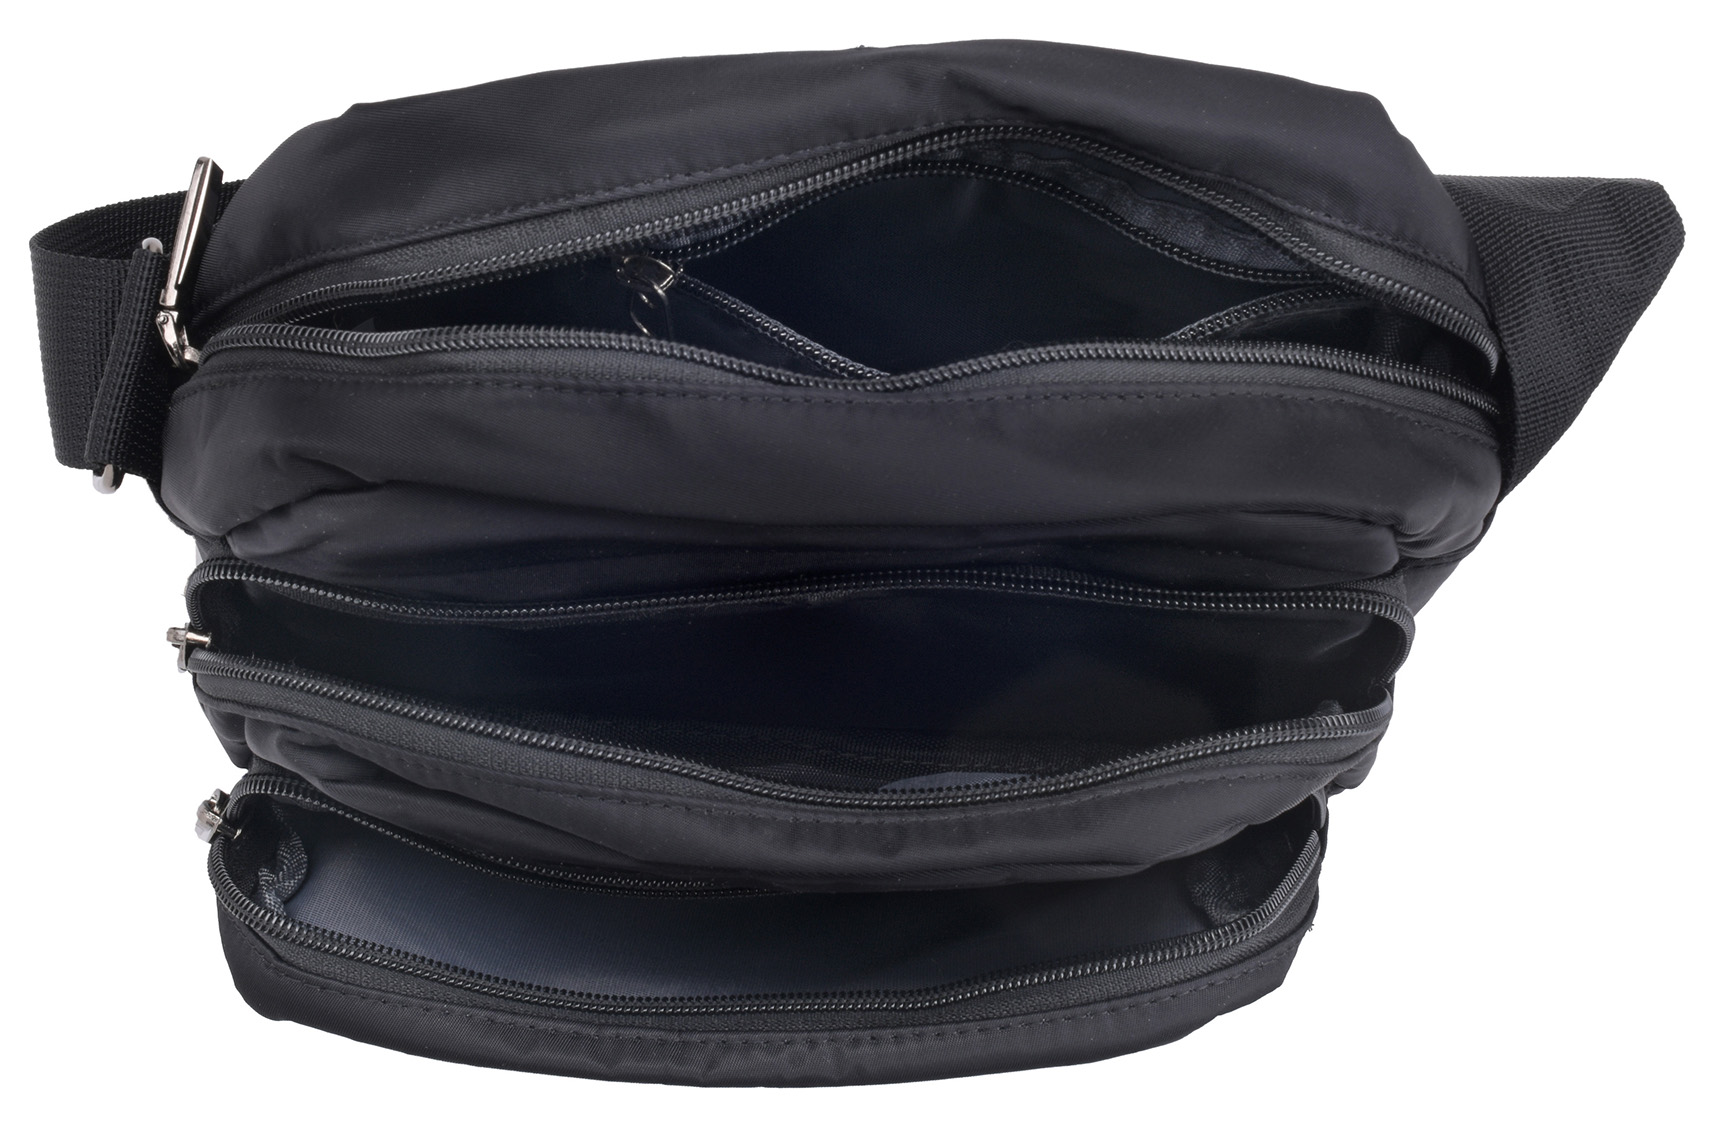 travel bag with compartments